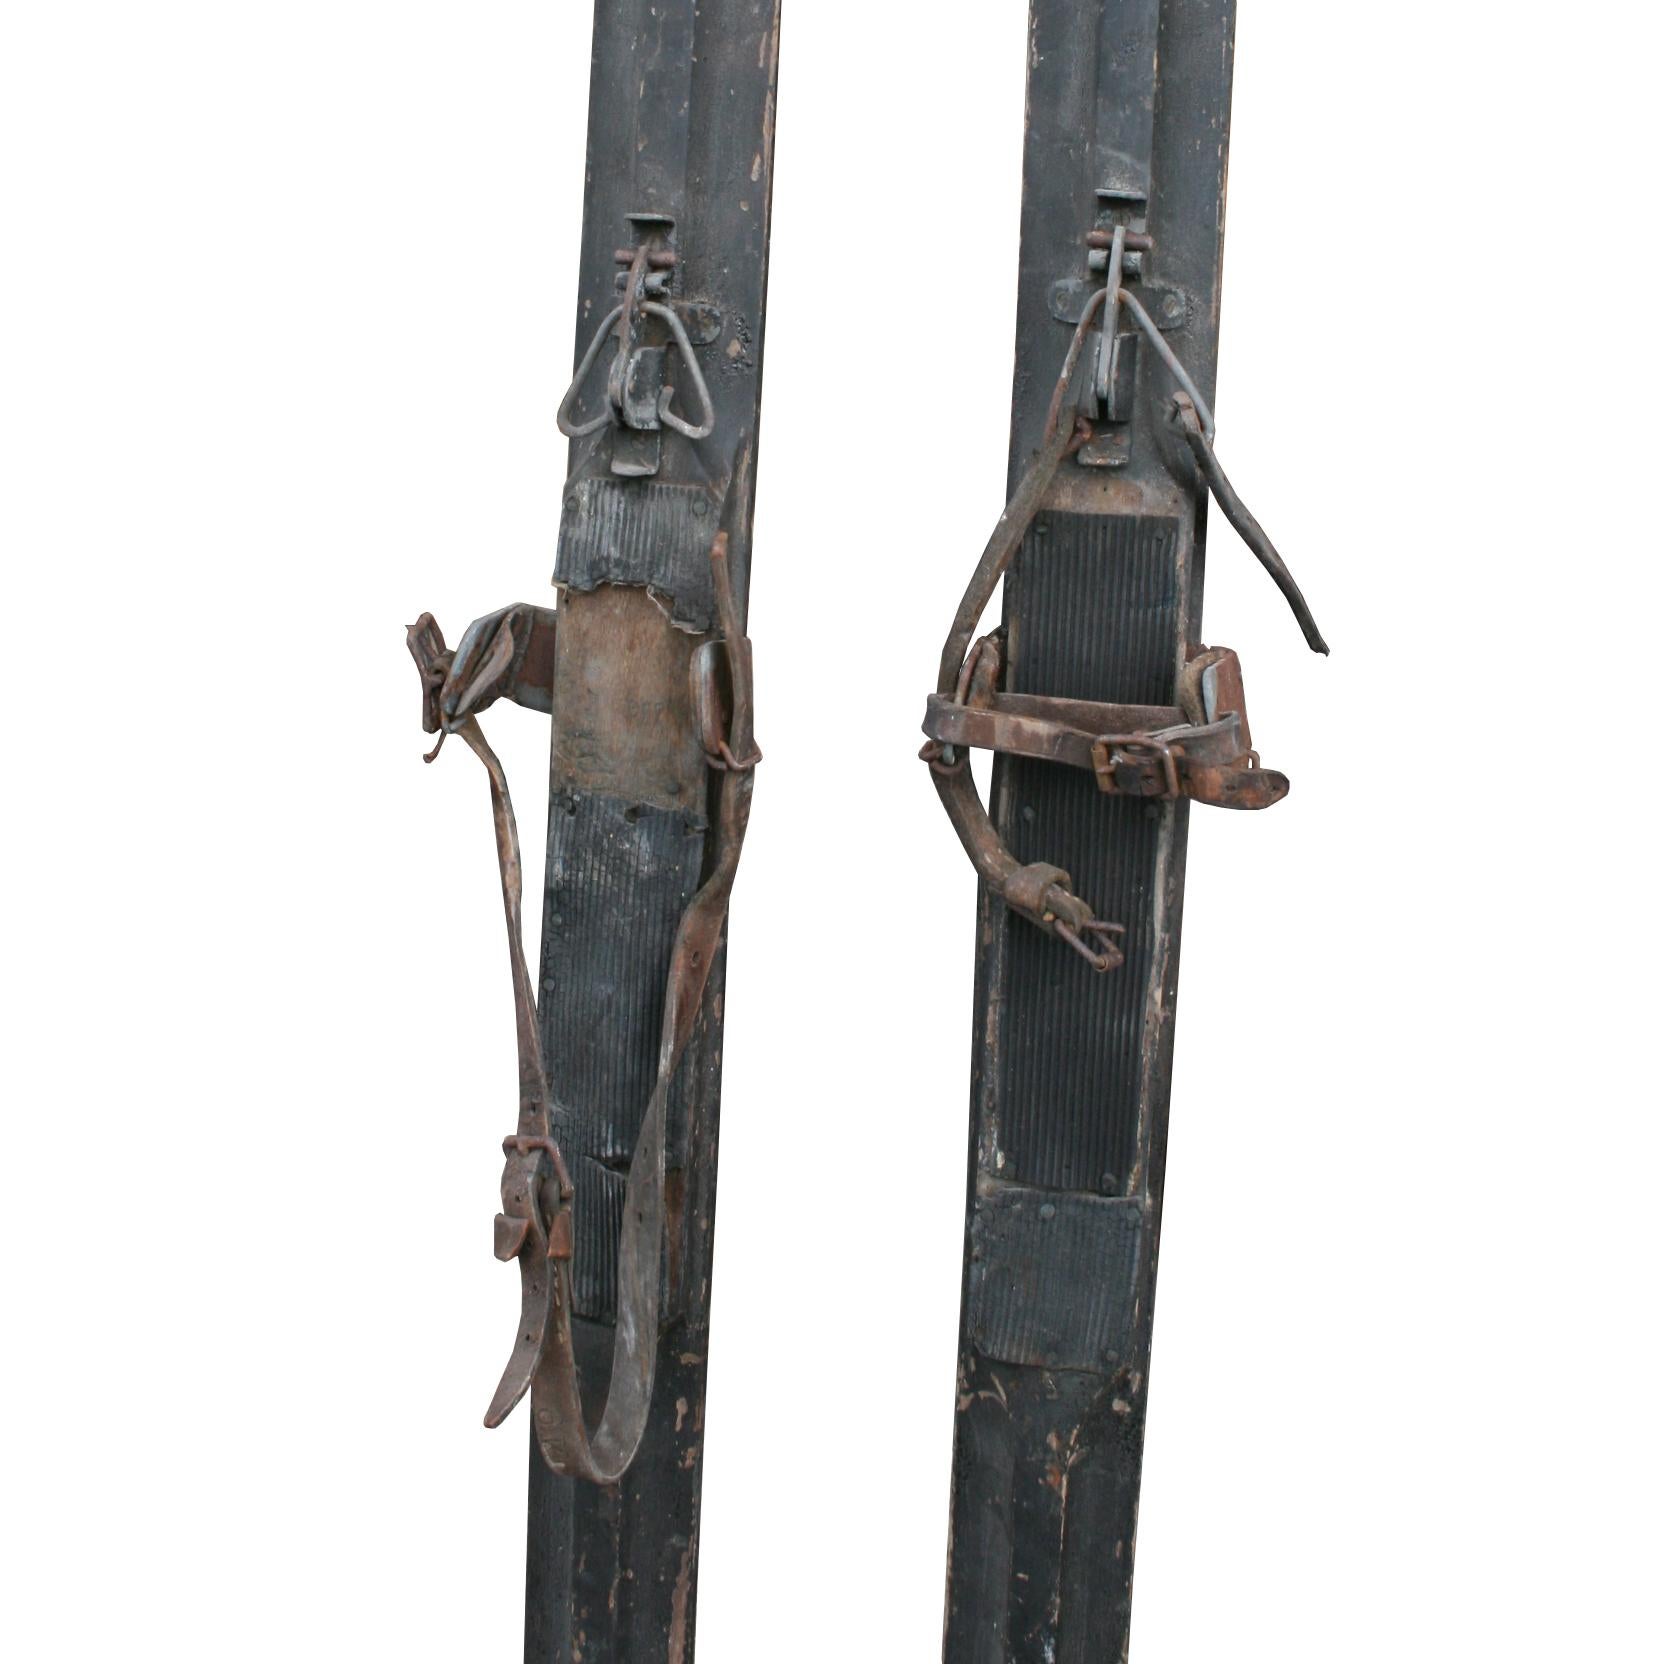 Pair of early Scandinavian Skis, most probably made for cross country purpose. The ski's have the unusual wide groove on the bottom and a early type binding that is fitted through the ski. The front part of the binding may well be a later addition.